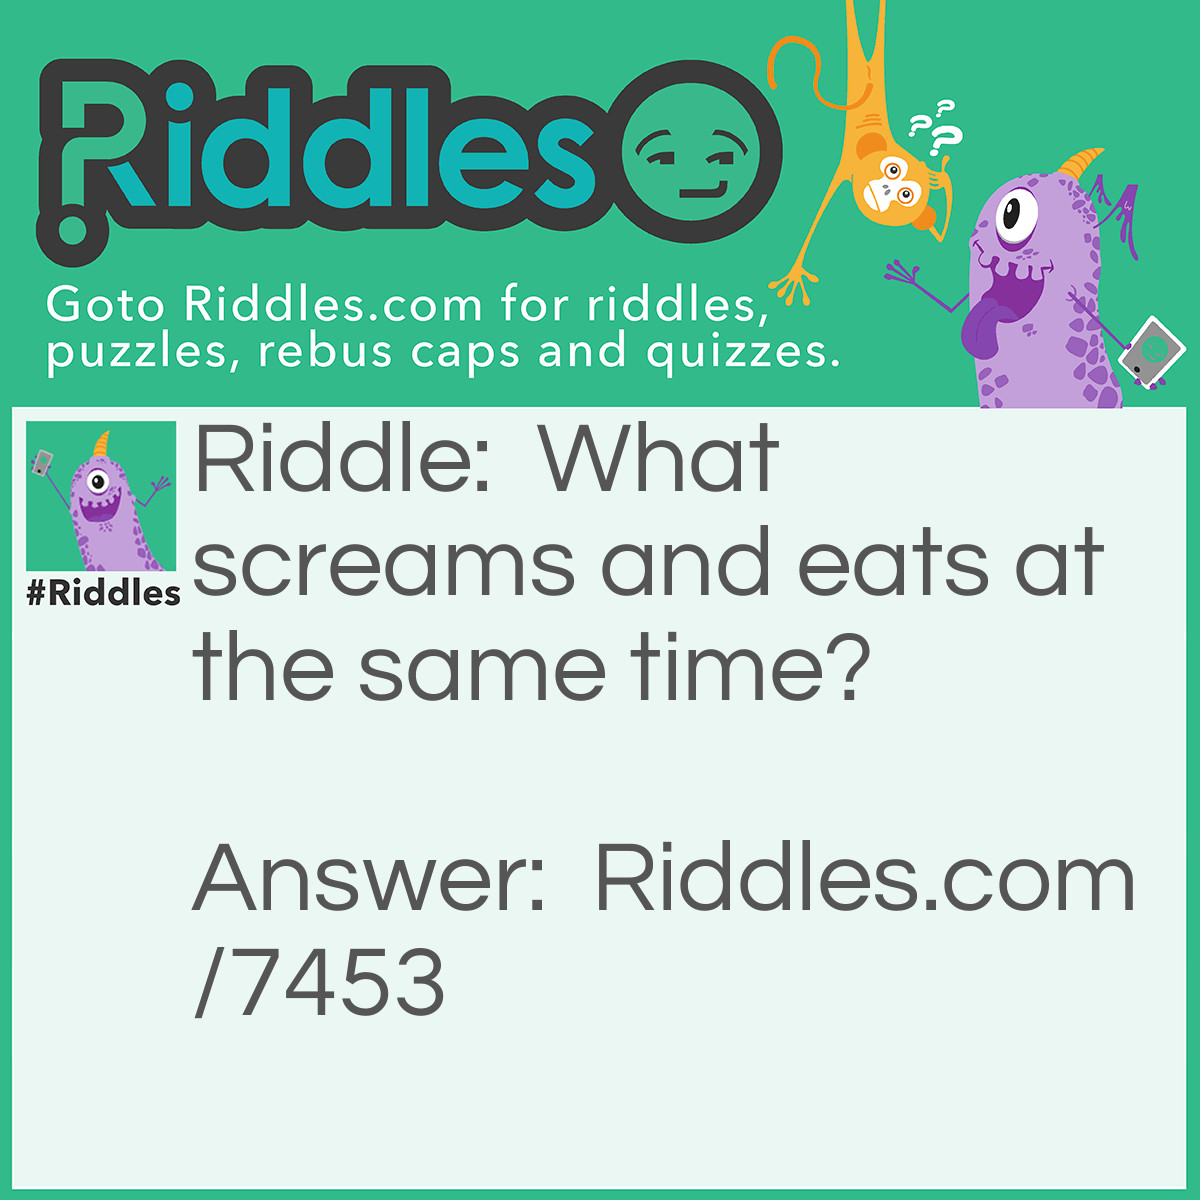 Riddle: What screams and eats at the same time? Answer: A vacuum.